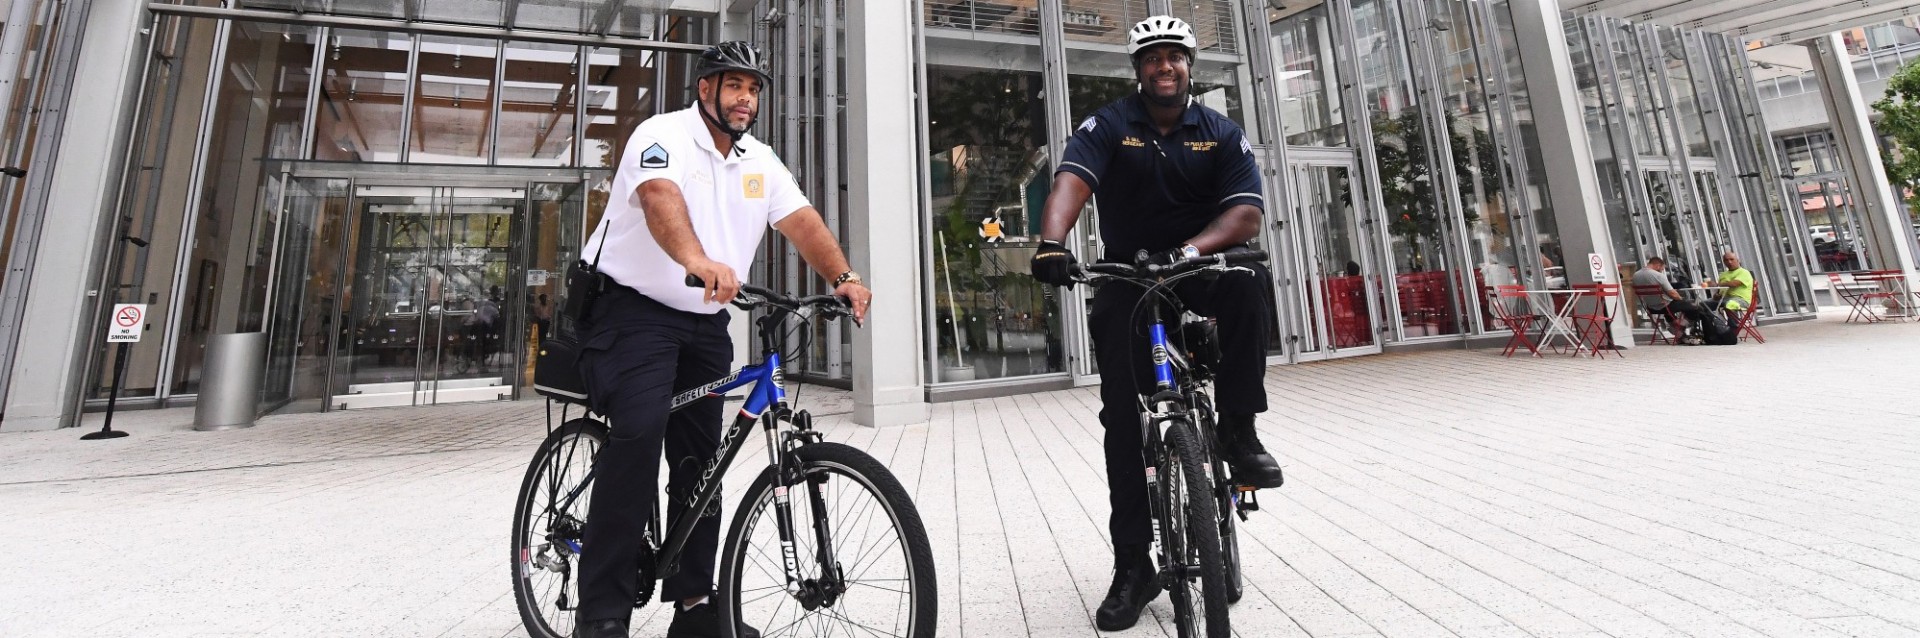 Two officers on bicycles posing in front of the Jerome L. Greene Science Center in Manhattanville